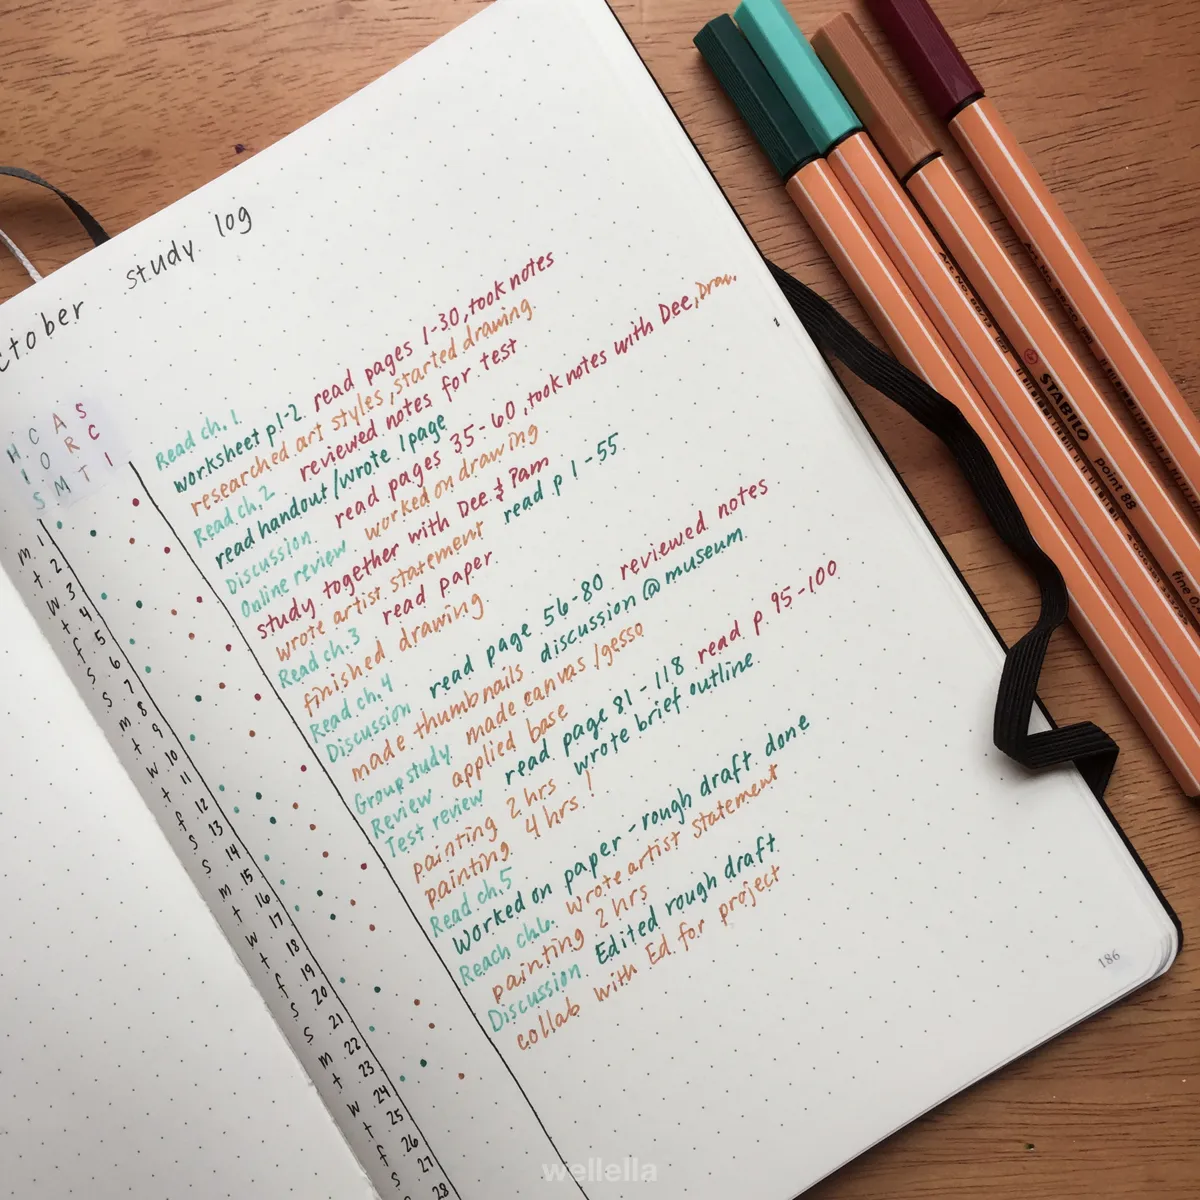 A page in a dot grid notebook showing a handwritten study log for October, with study activities marked in a chart with different colored pens.